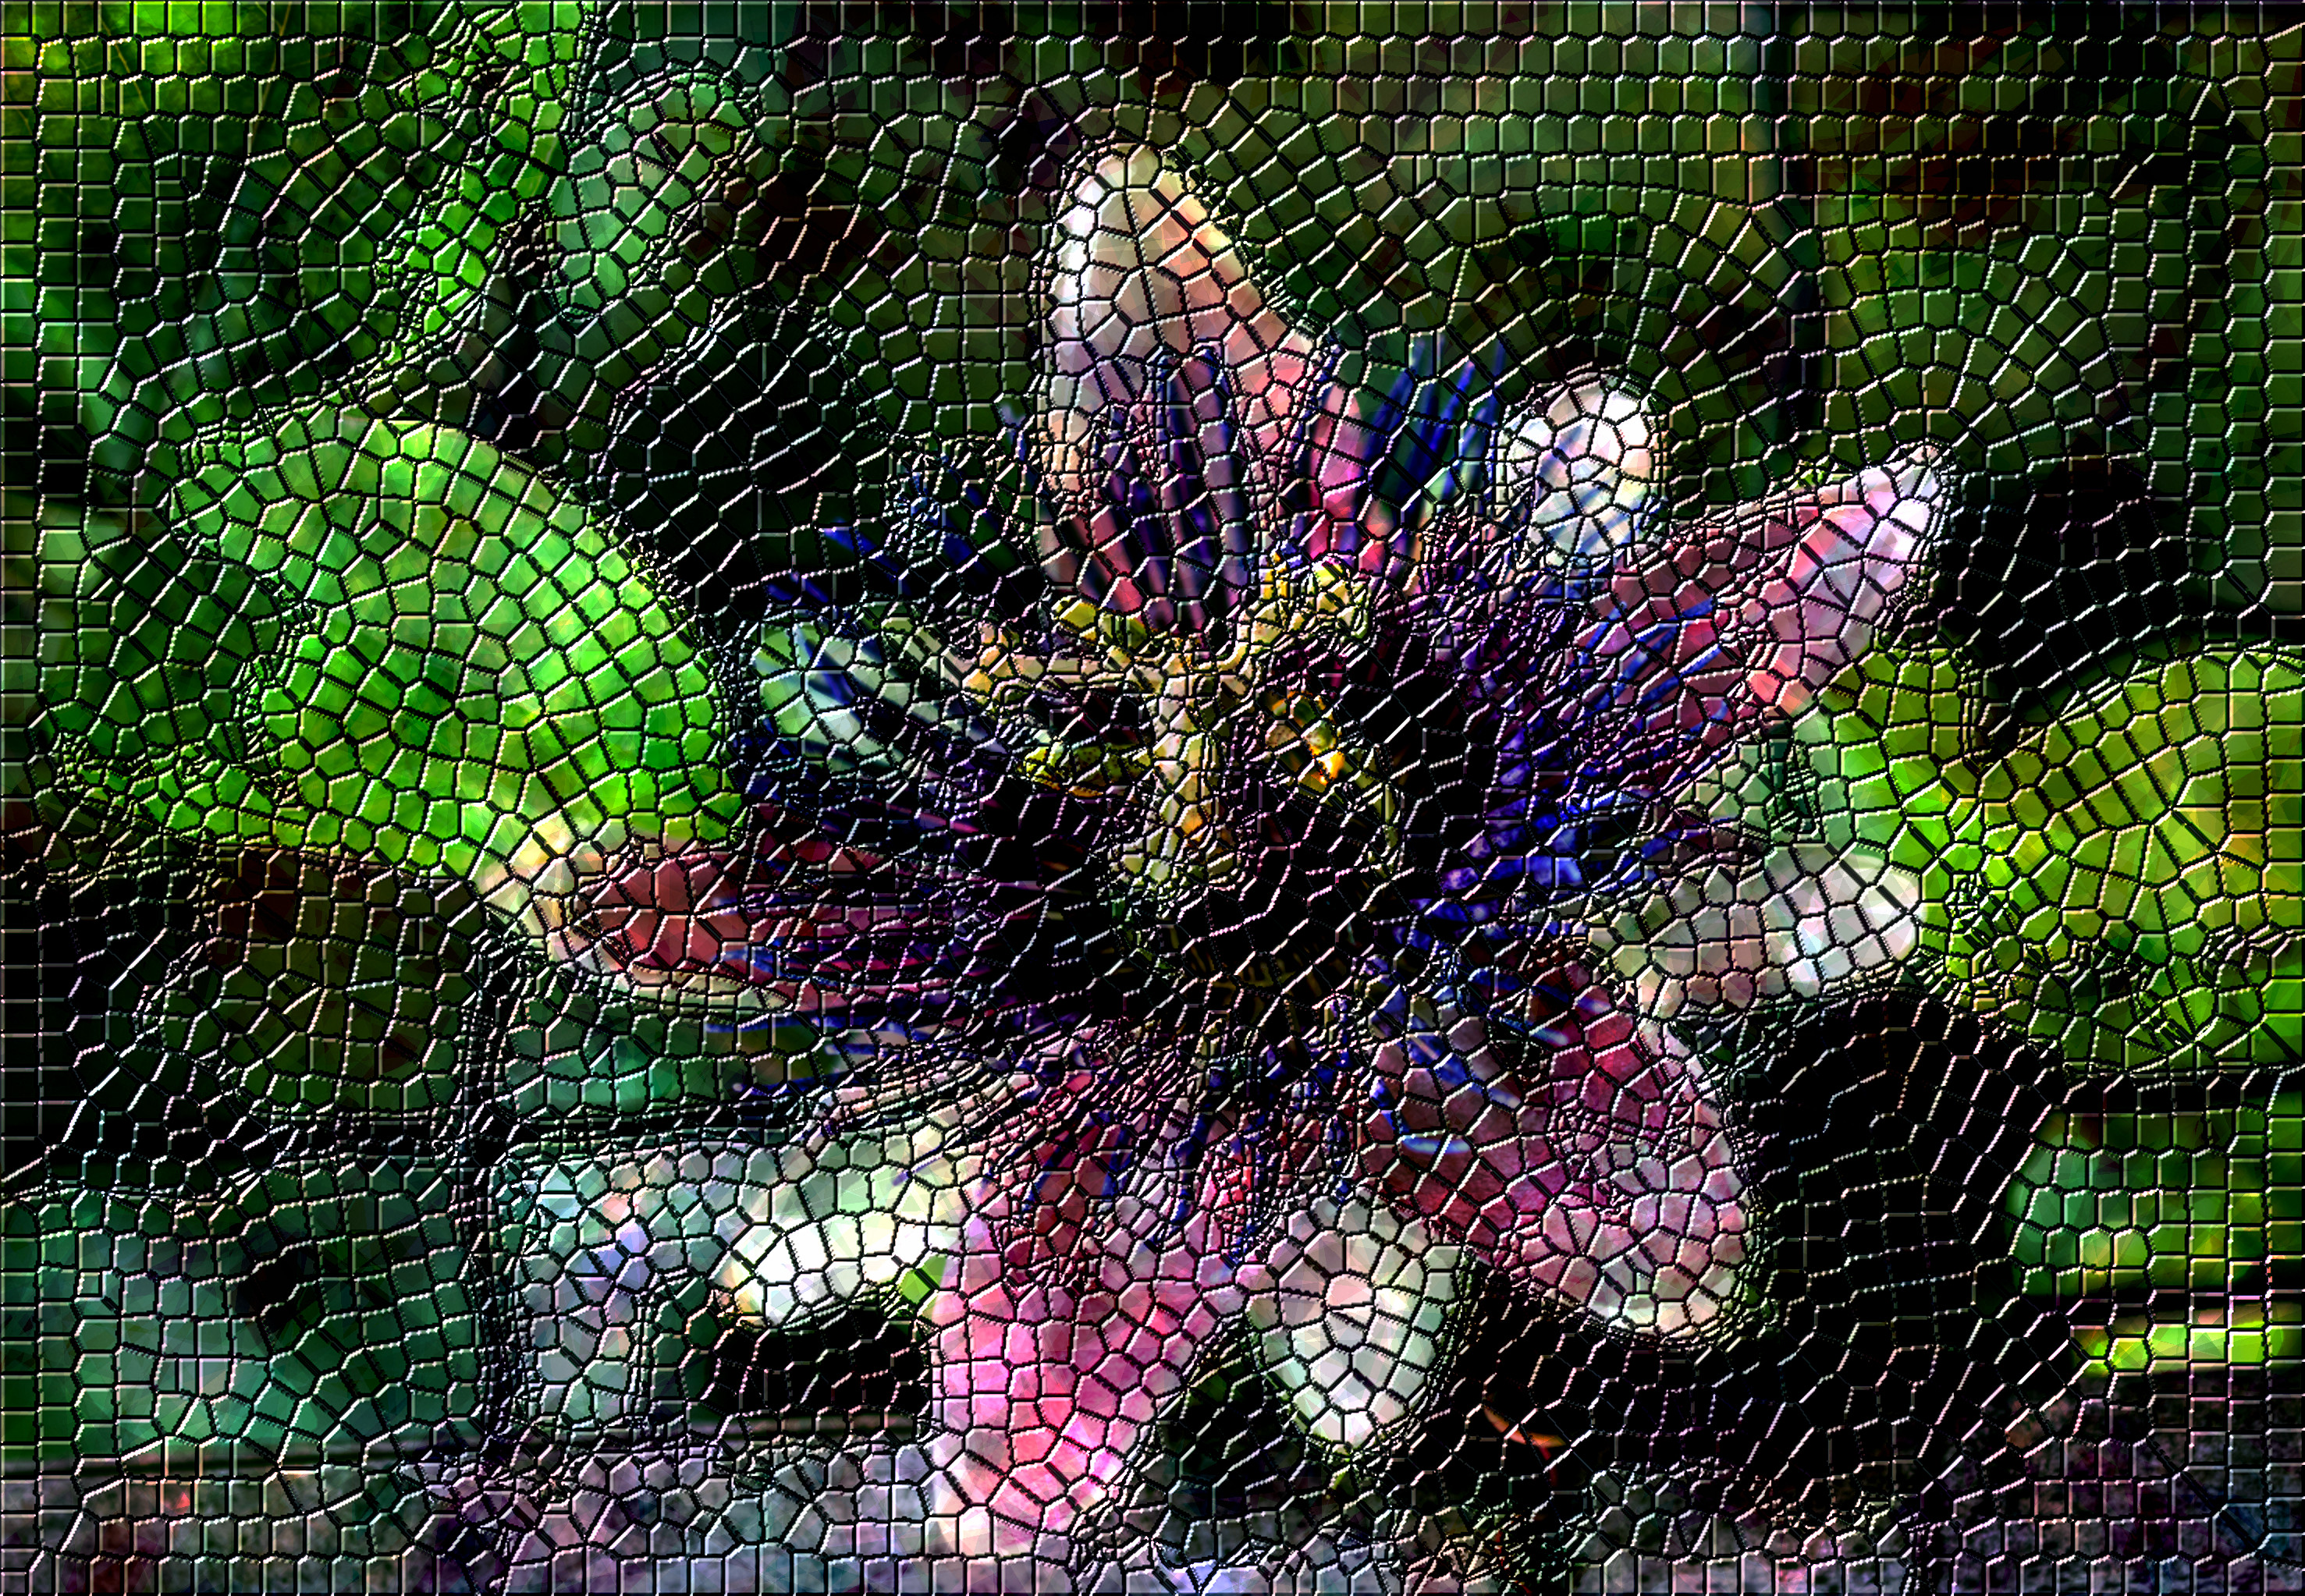 2020-04-11 09-06-56 close-up-photo-of-a-passion-flower-3123912, as a Mosaic Roman style.jpg